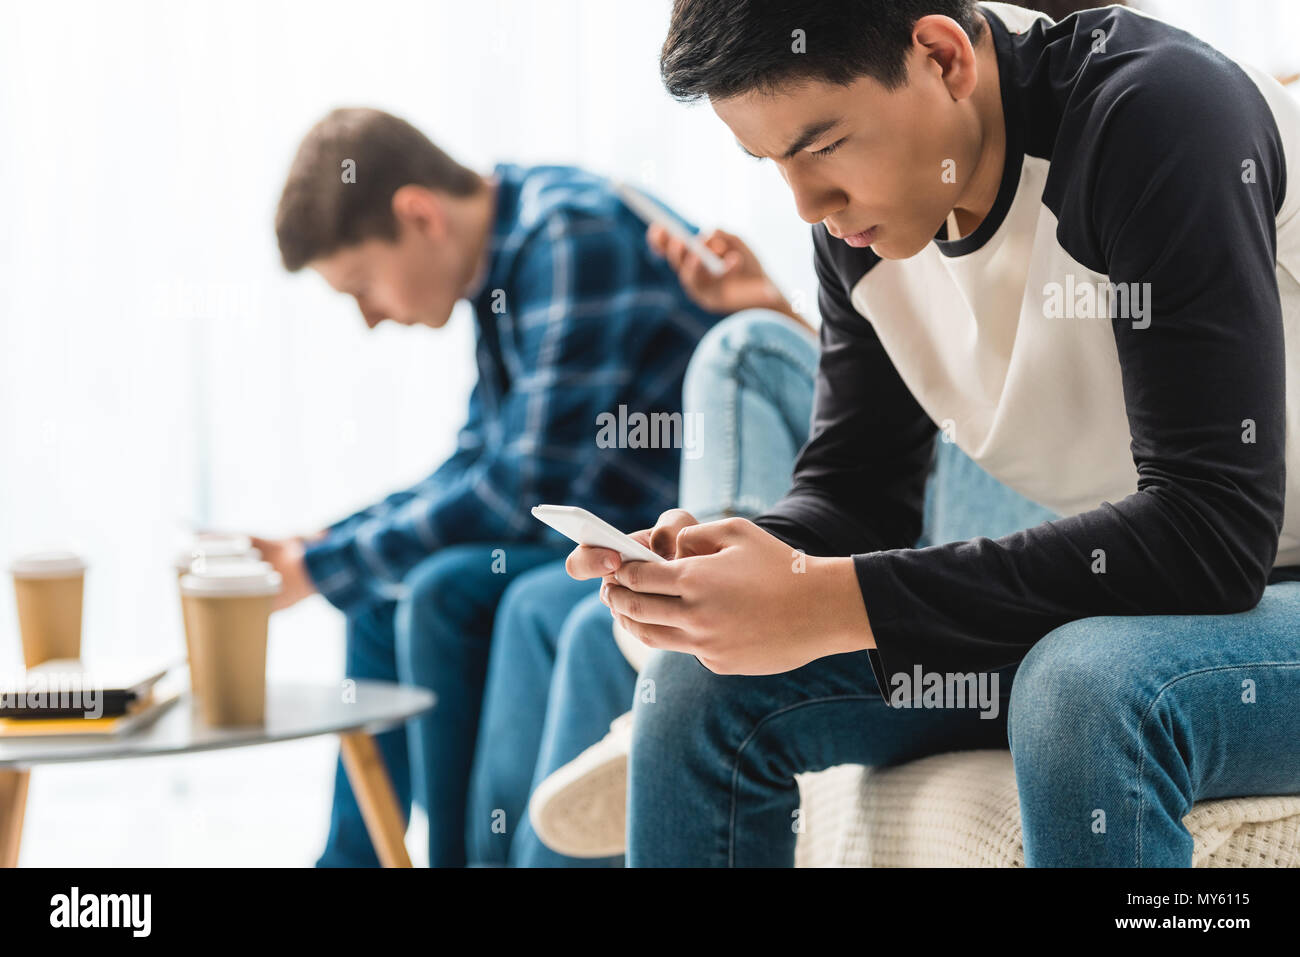 three serious teenagers sitting with smartphones Stock Photo